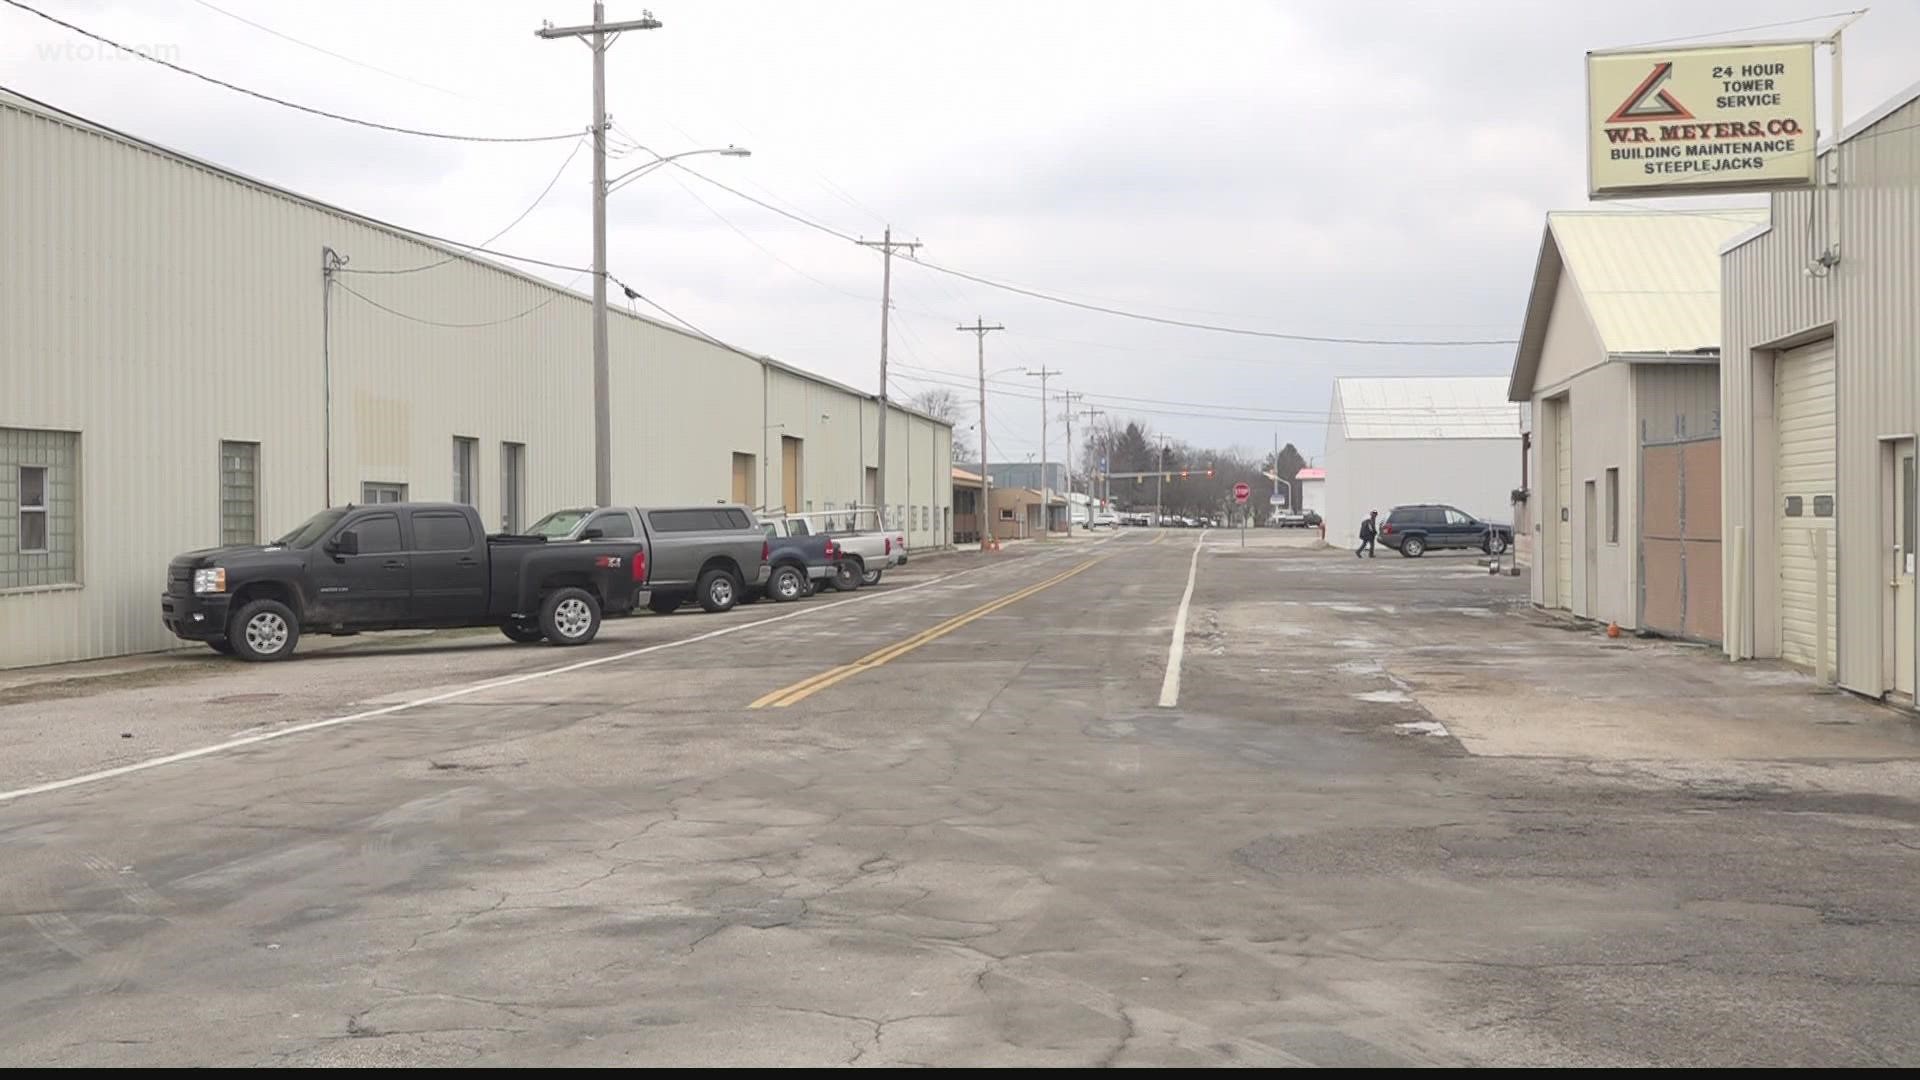 Along with repaving and adding street-side parking, the city is also using an ODOT grant to extend a bike path from west of town into downtown at Front Street